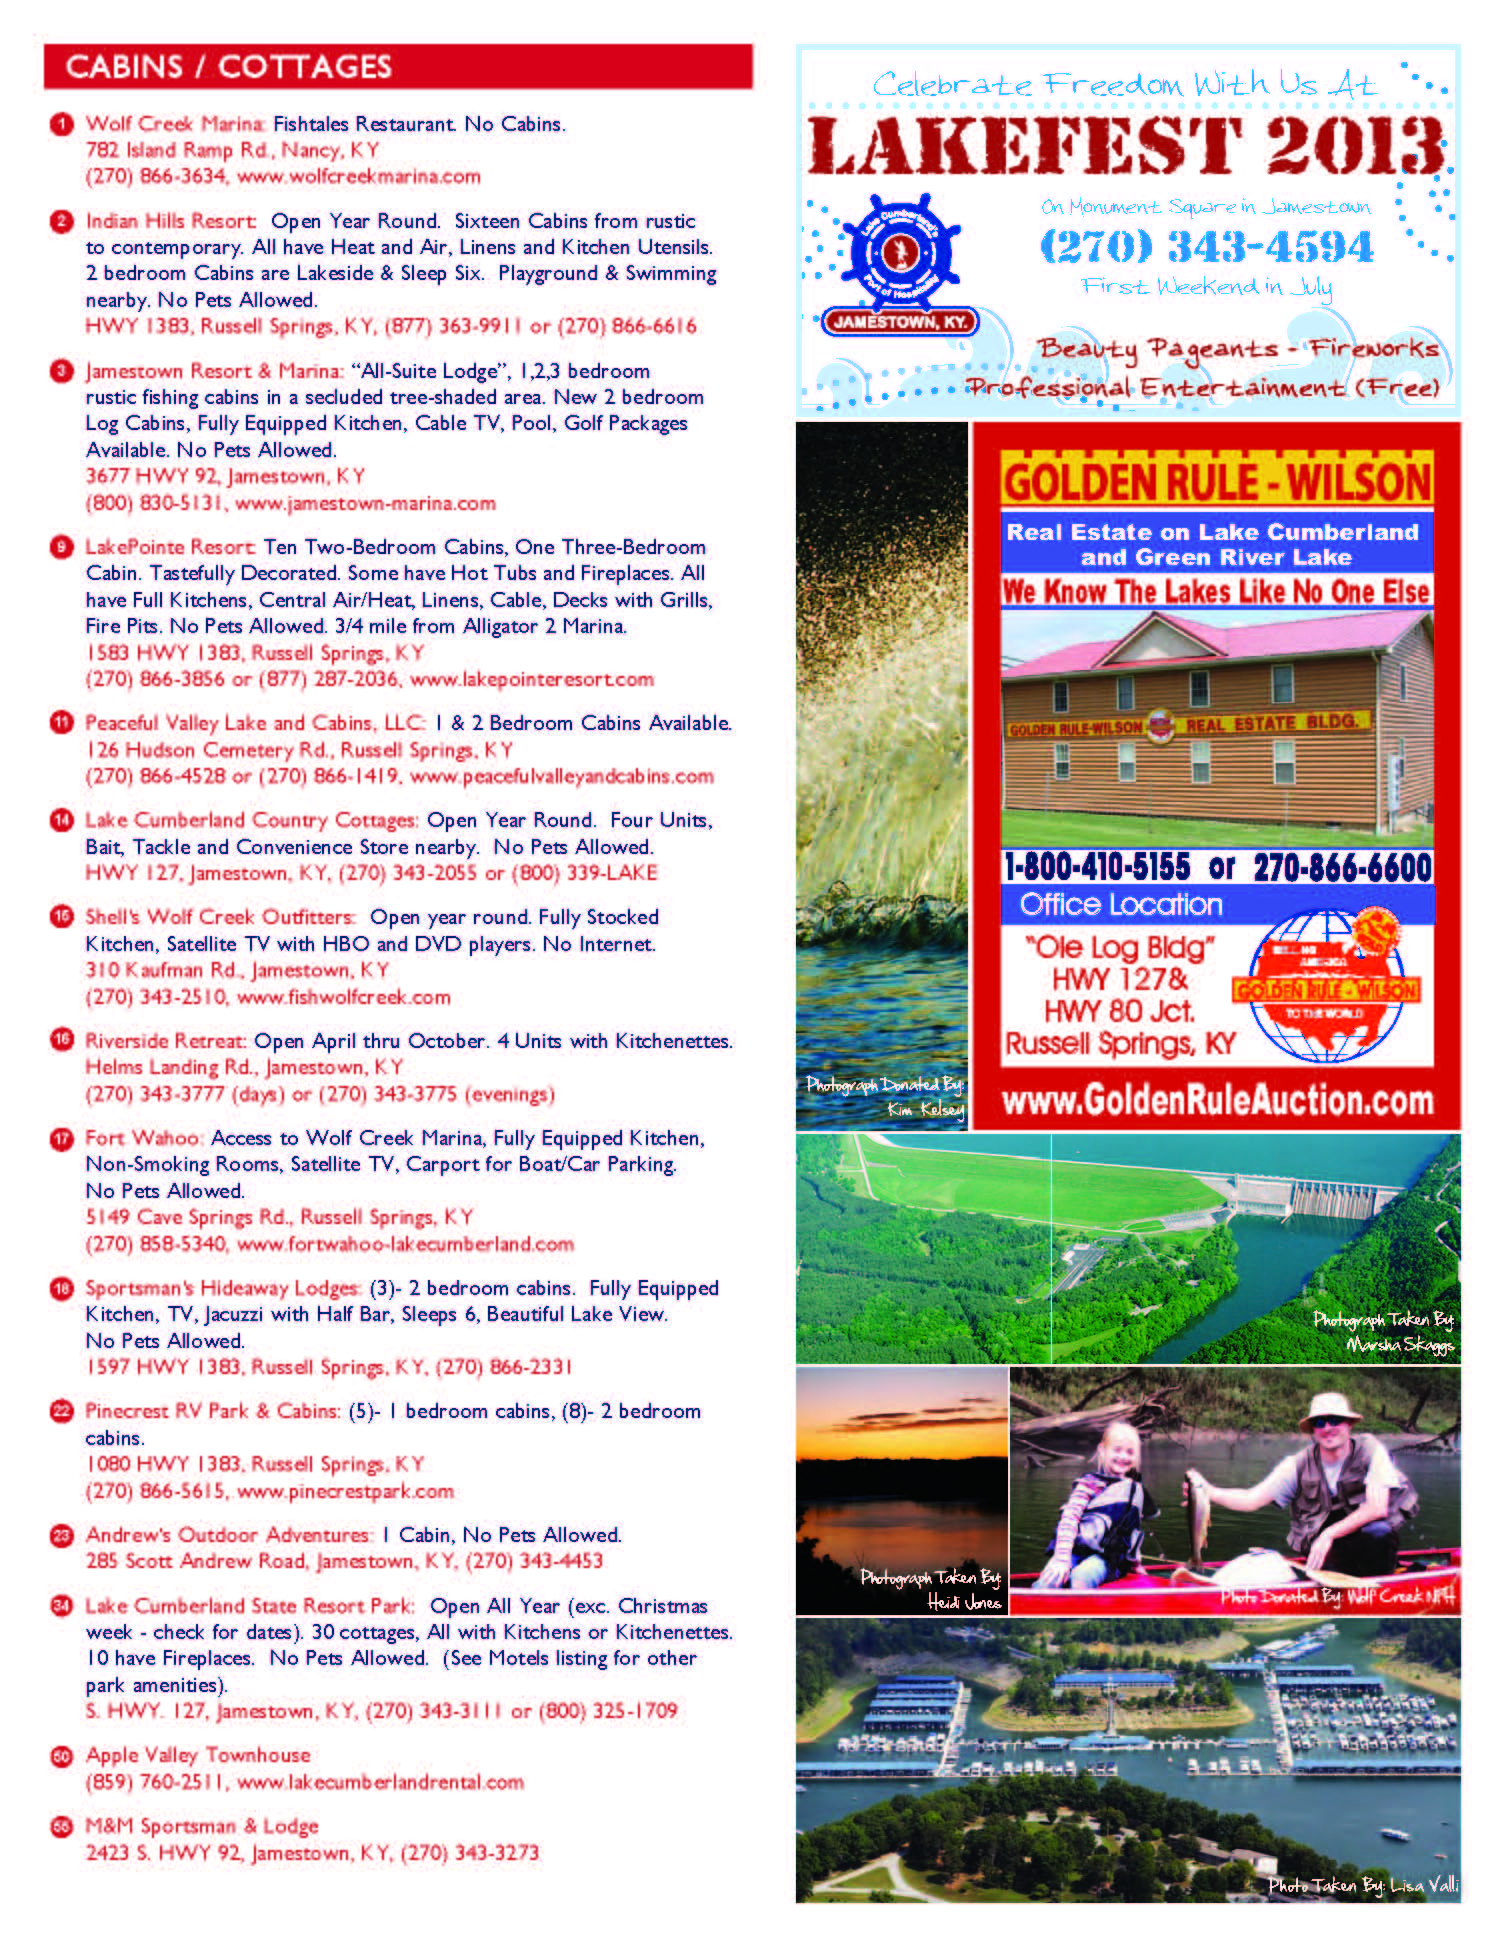 visitor-guide2013-web_Page_06.jpg